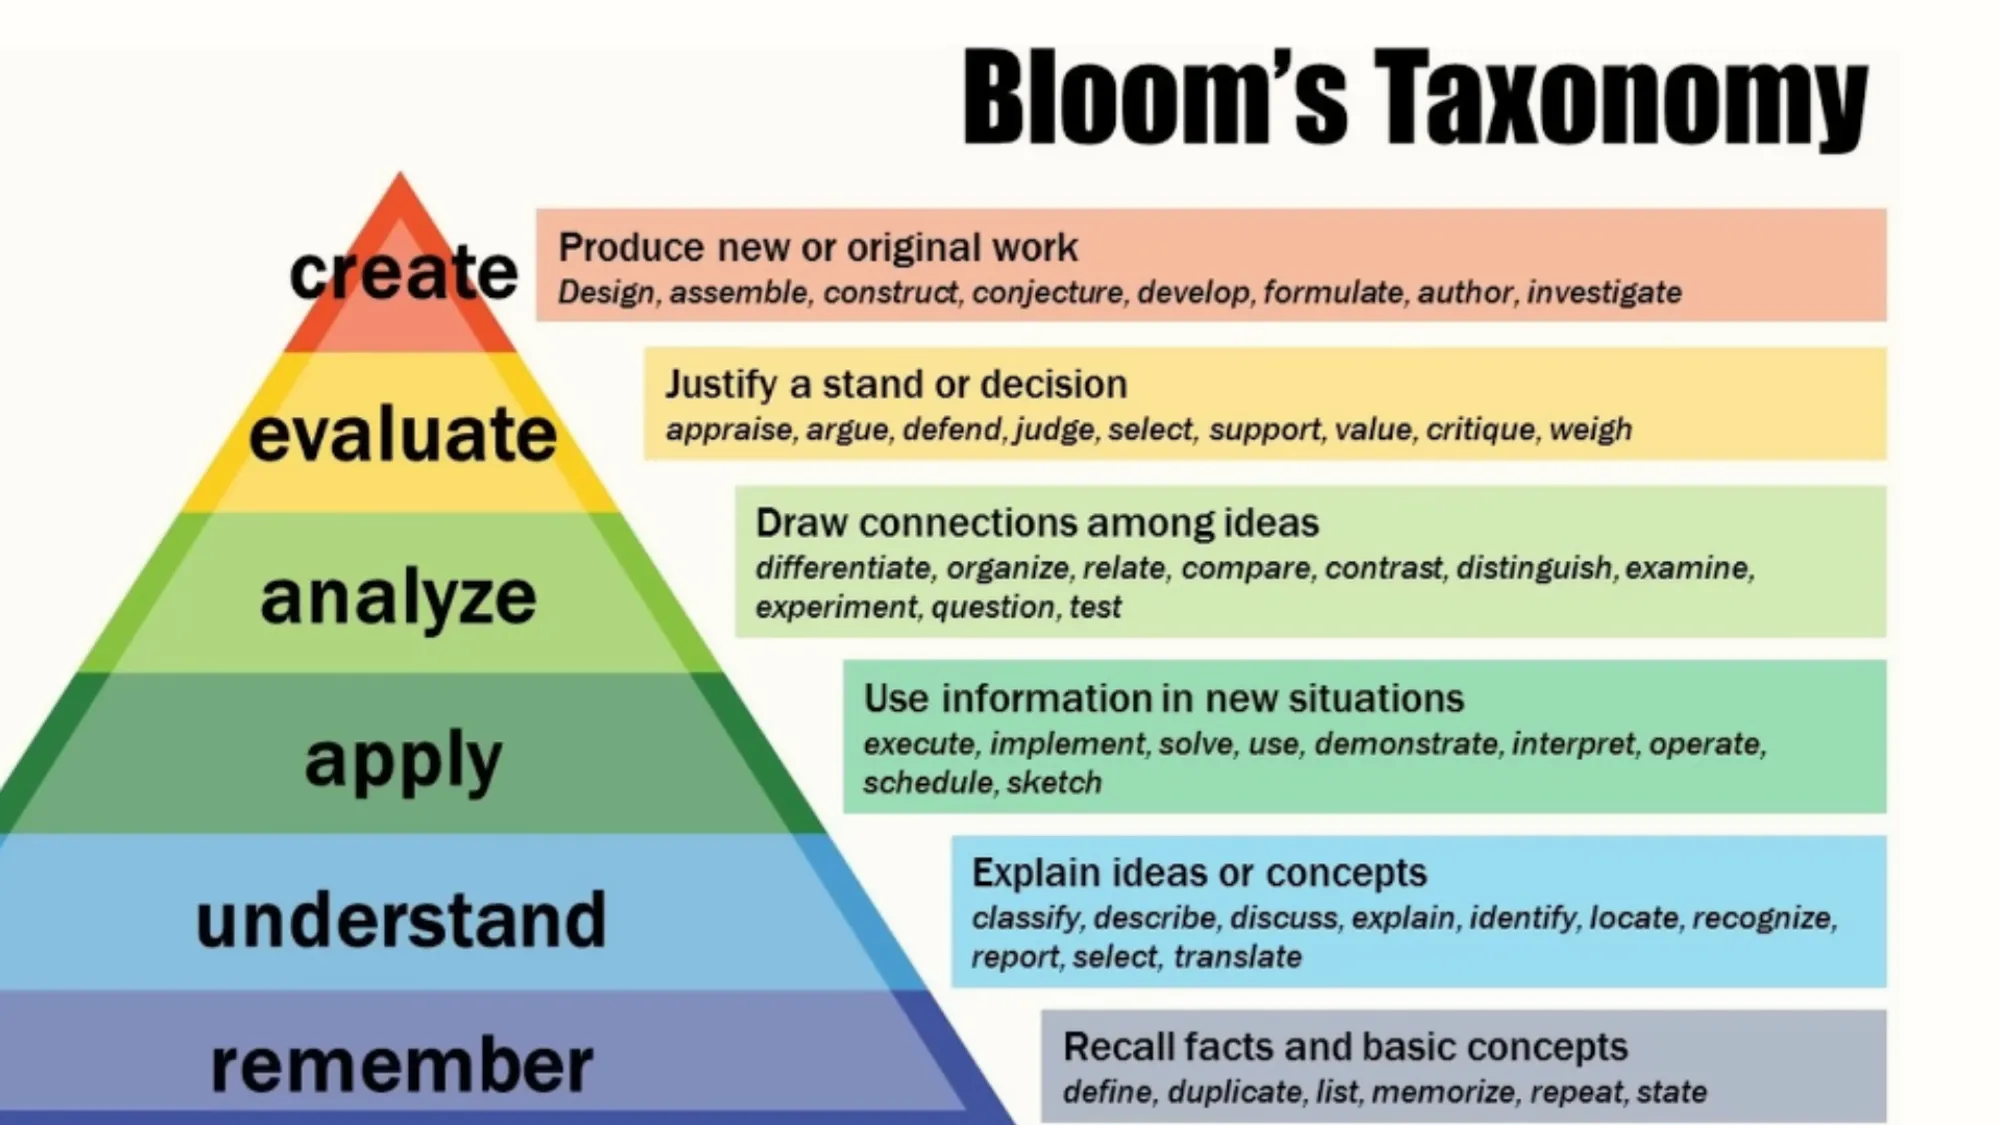 Bloom’s taxonomy shows you what exactly higher-order thinking is: Creation, evaluation and analysis will bring you the biggest study gains - while, counterintuitively, a focus on memory won’t bring you as far.